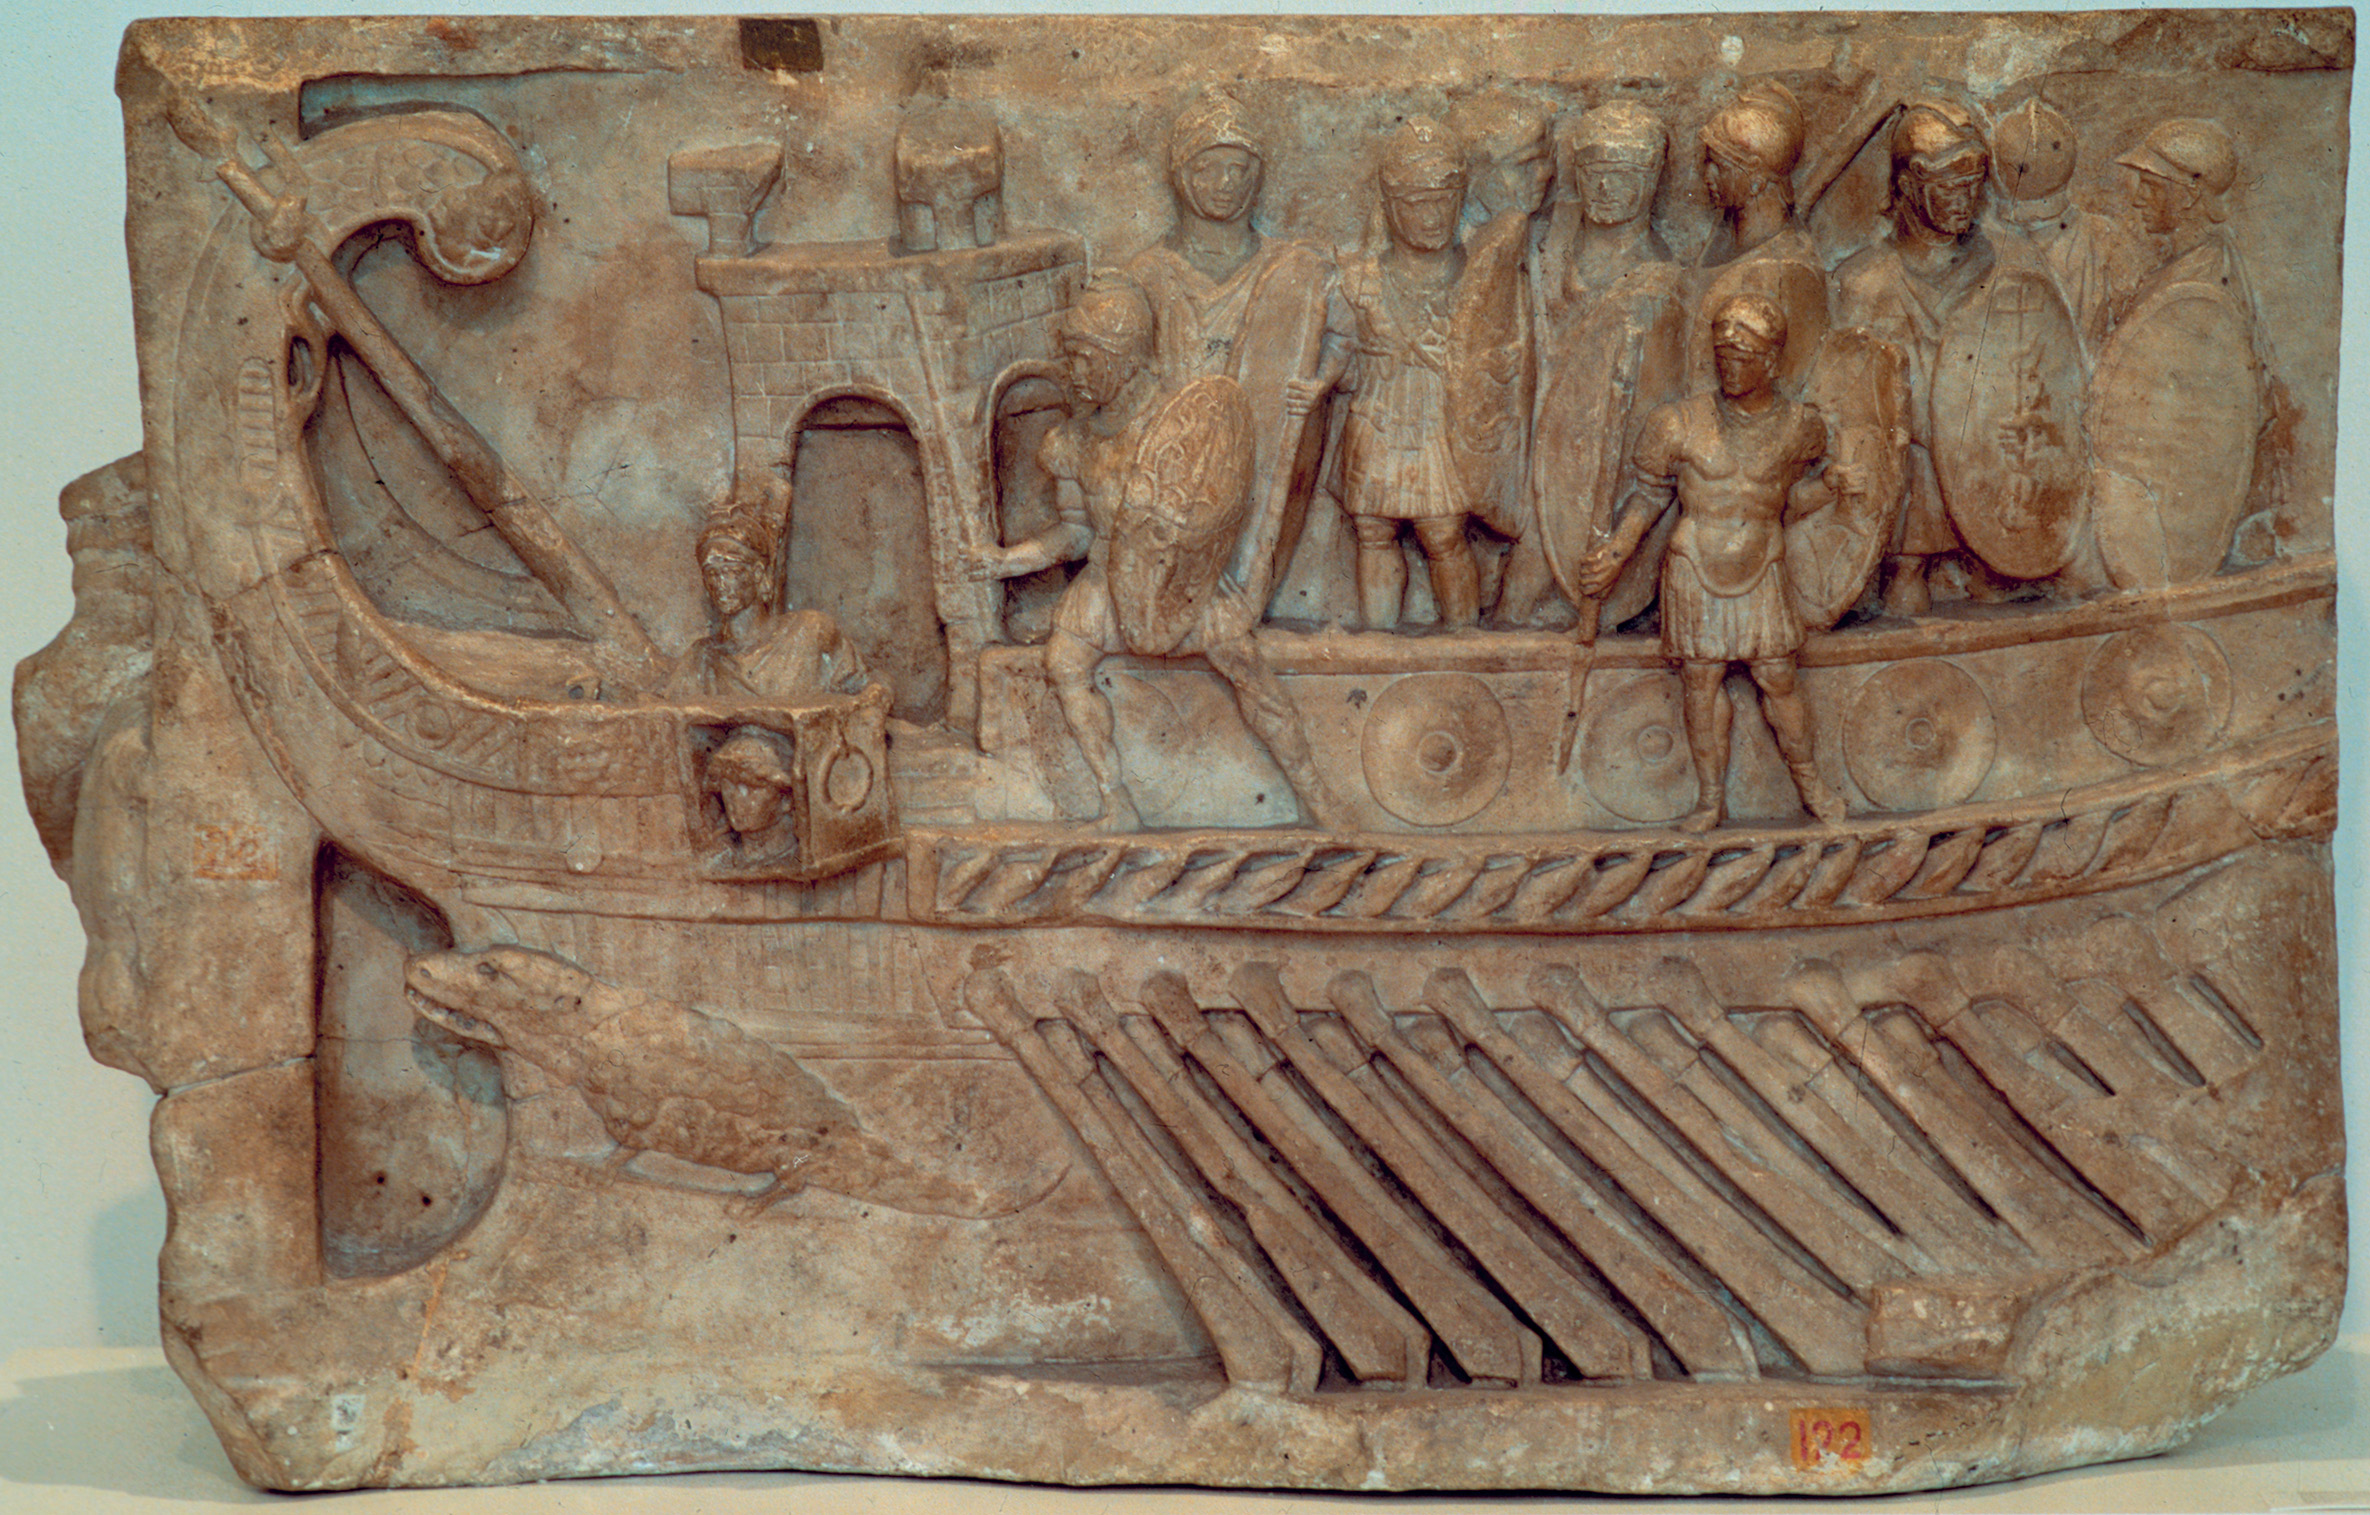 A Roman galley makes its way by oar power. One of its functions was to deliver Roman land-trained legionaries to the fight where they would board and seize enemy ships. 